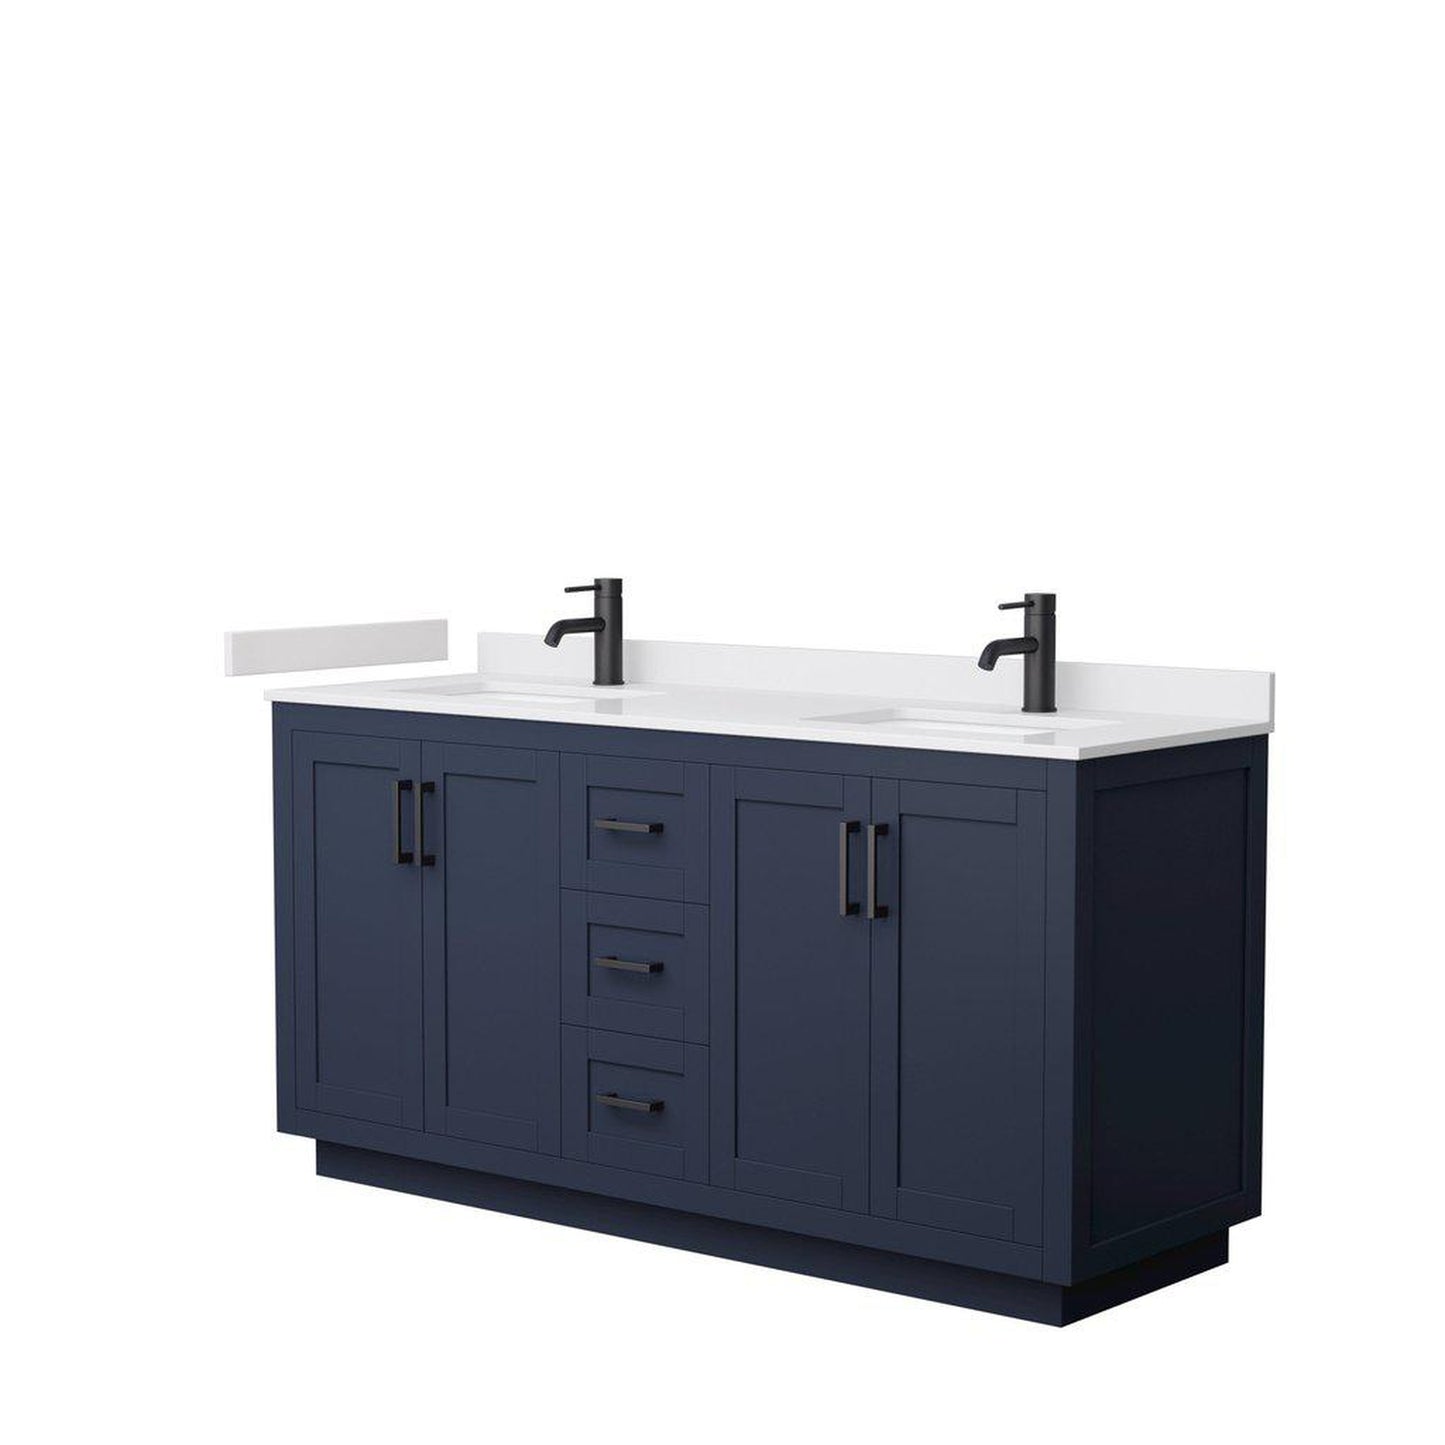 Wyndham Collection Miranda 66" Double Bathroom Dark Blue Vanity Set With White Cultured Marble Countertop, Undermount Square Sink, And Matte Black Trim